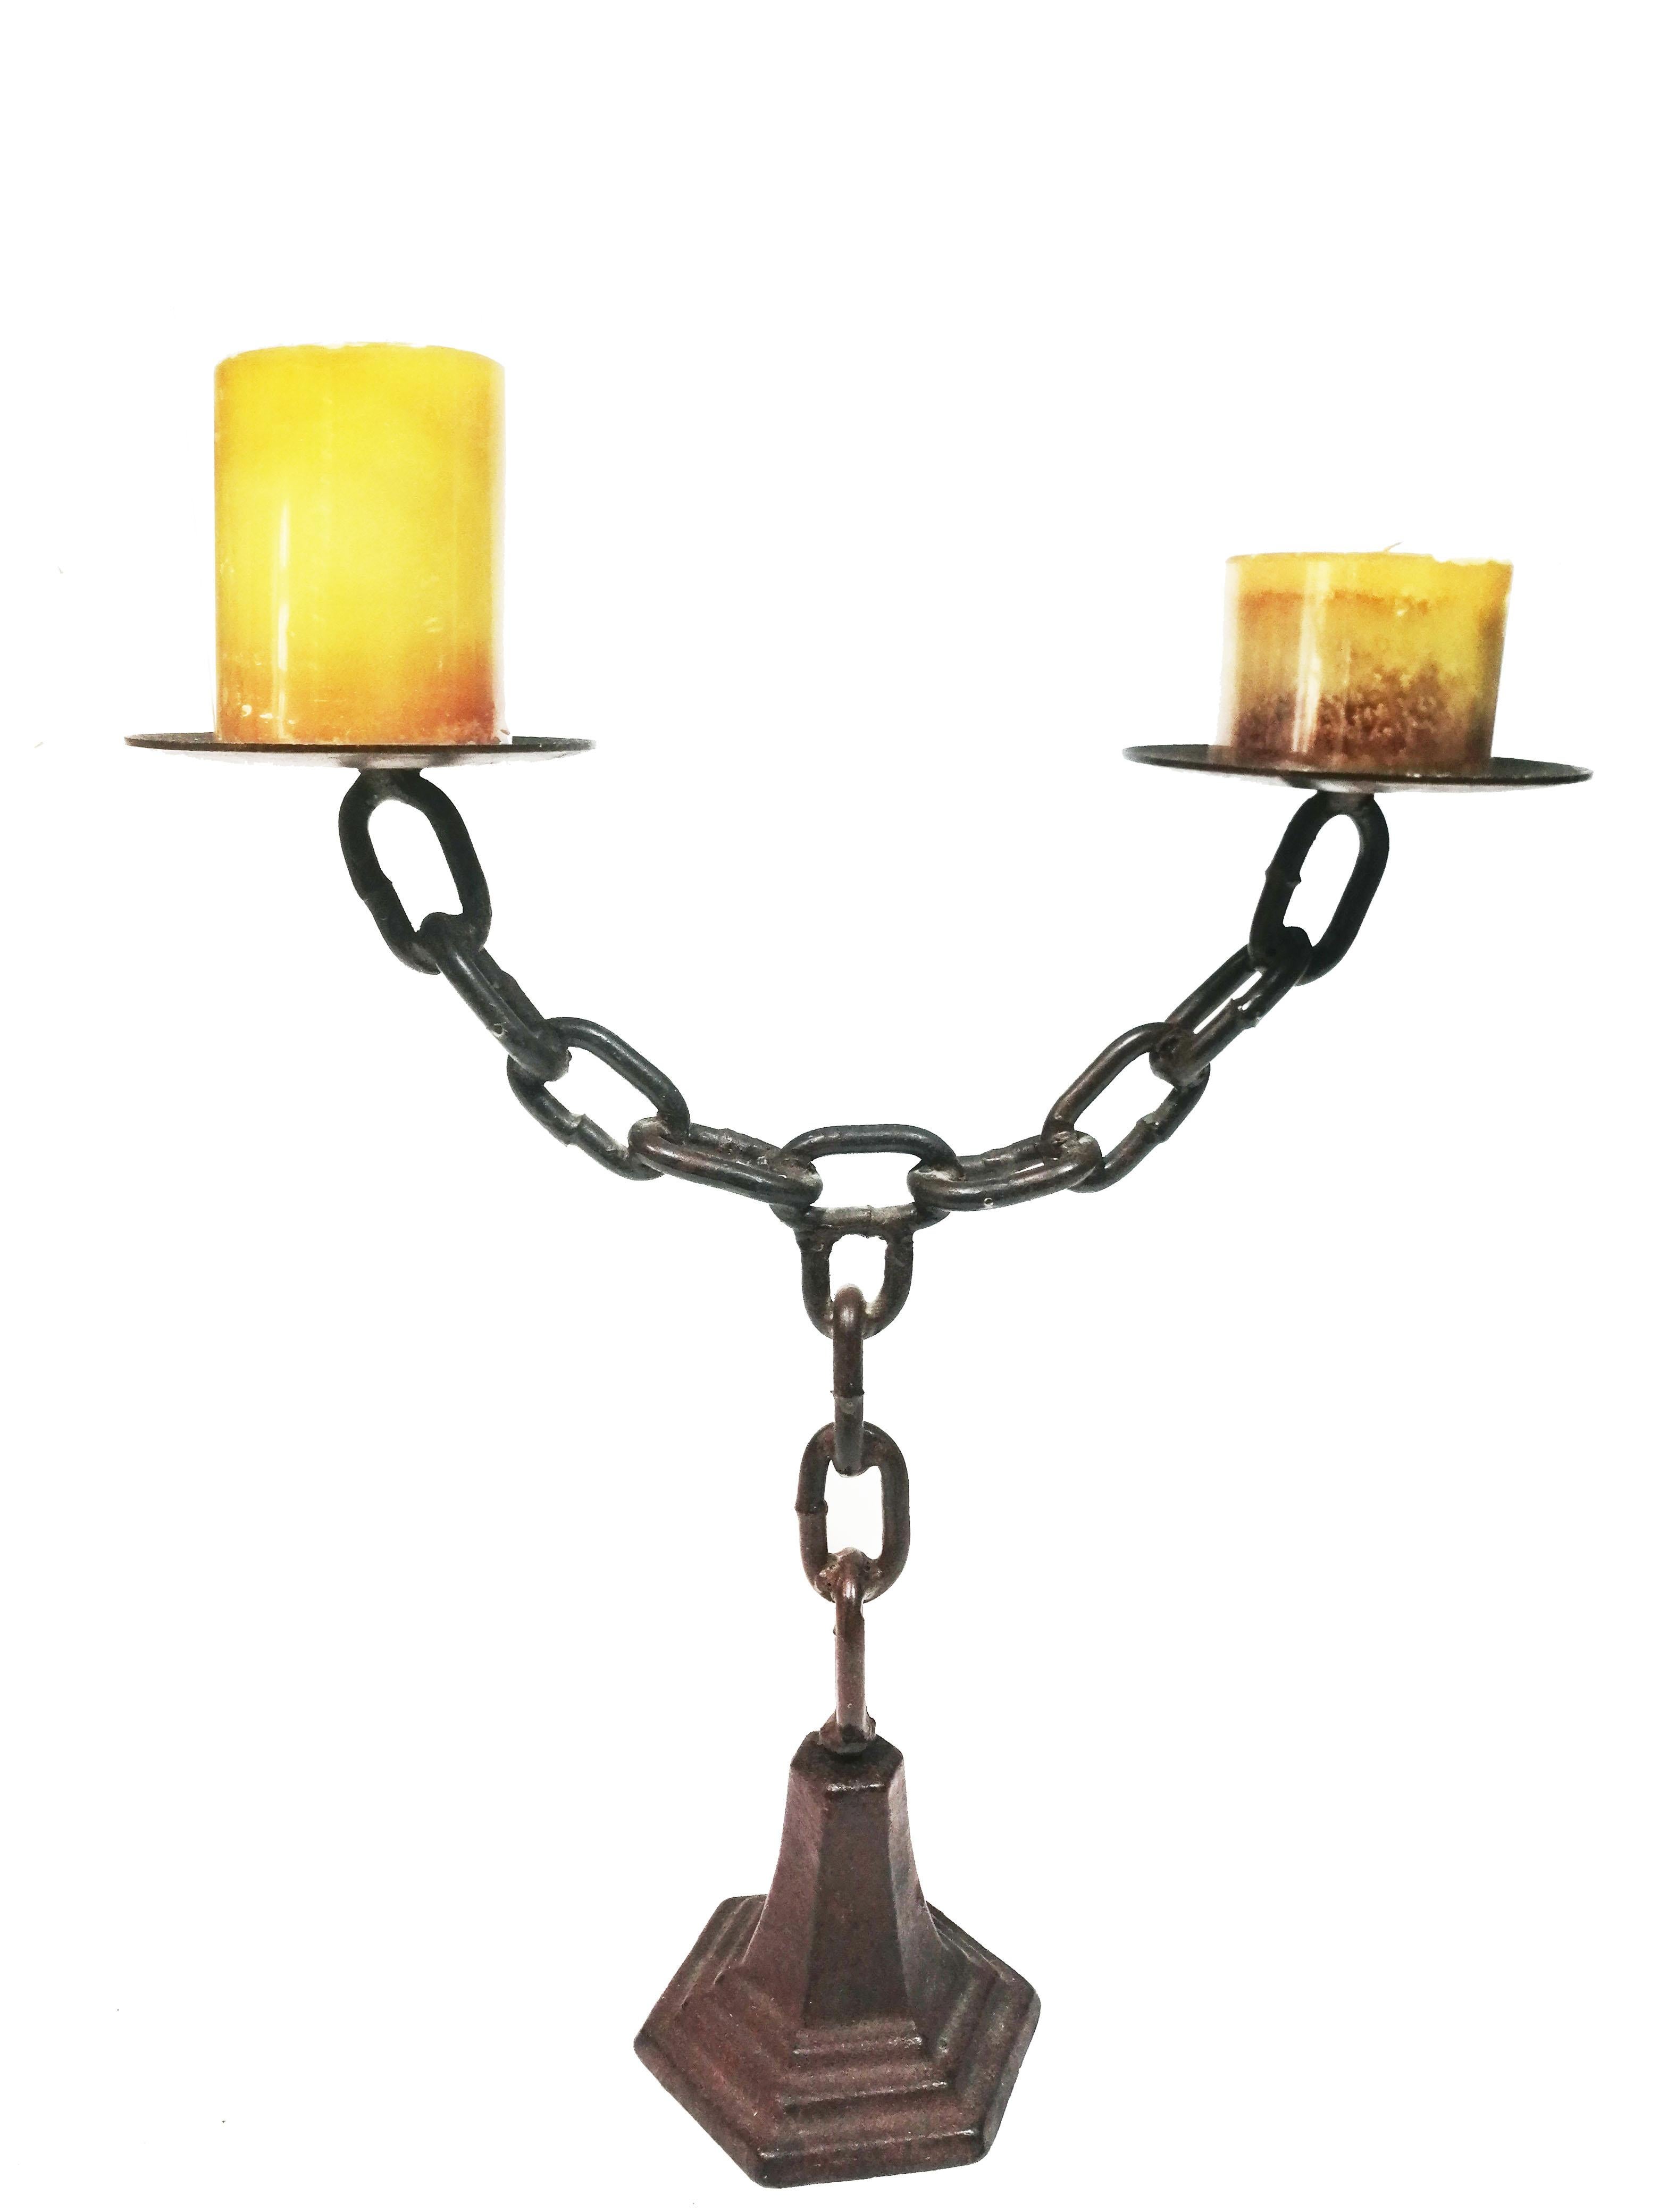 Chain shaped iron candlestick for two candles.

Beautiful medieval-looking chandelier
Spectacular condellabro or candle holder for two large candles

It is made of wrought iron, in the shape of a chain and with two arms

